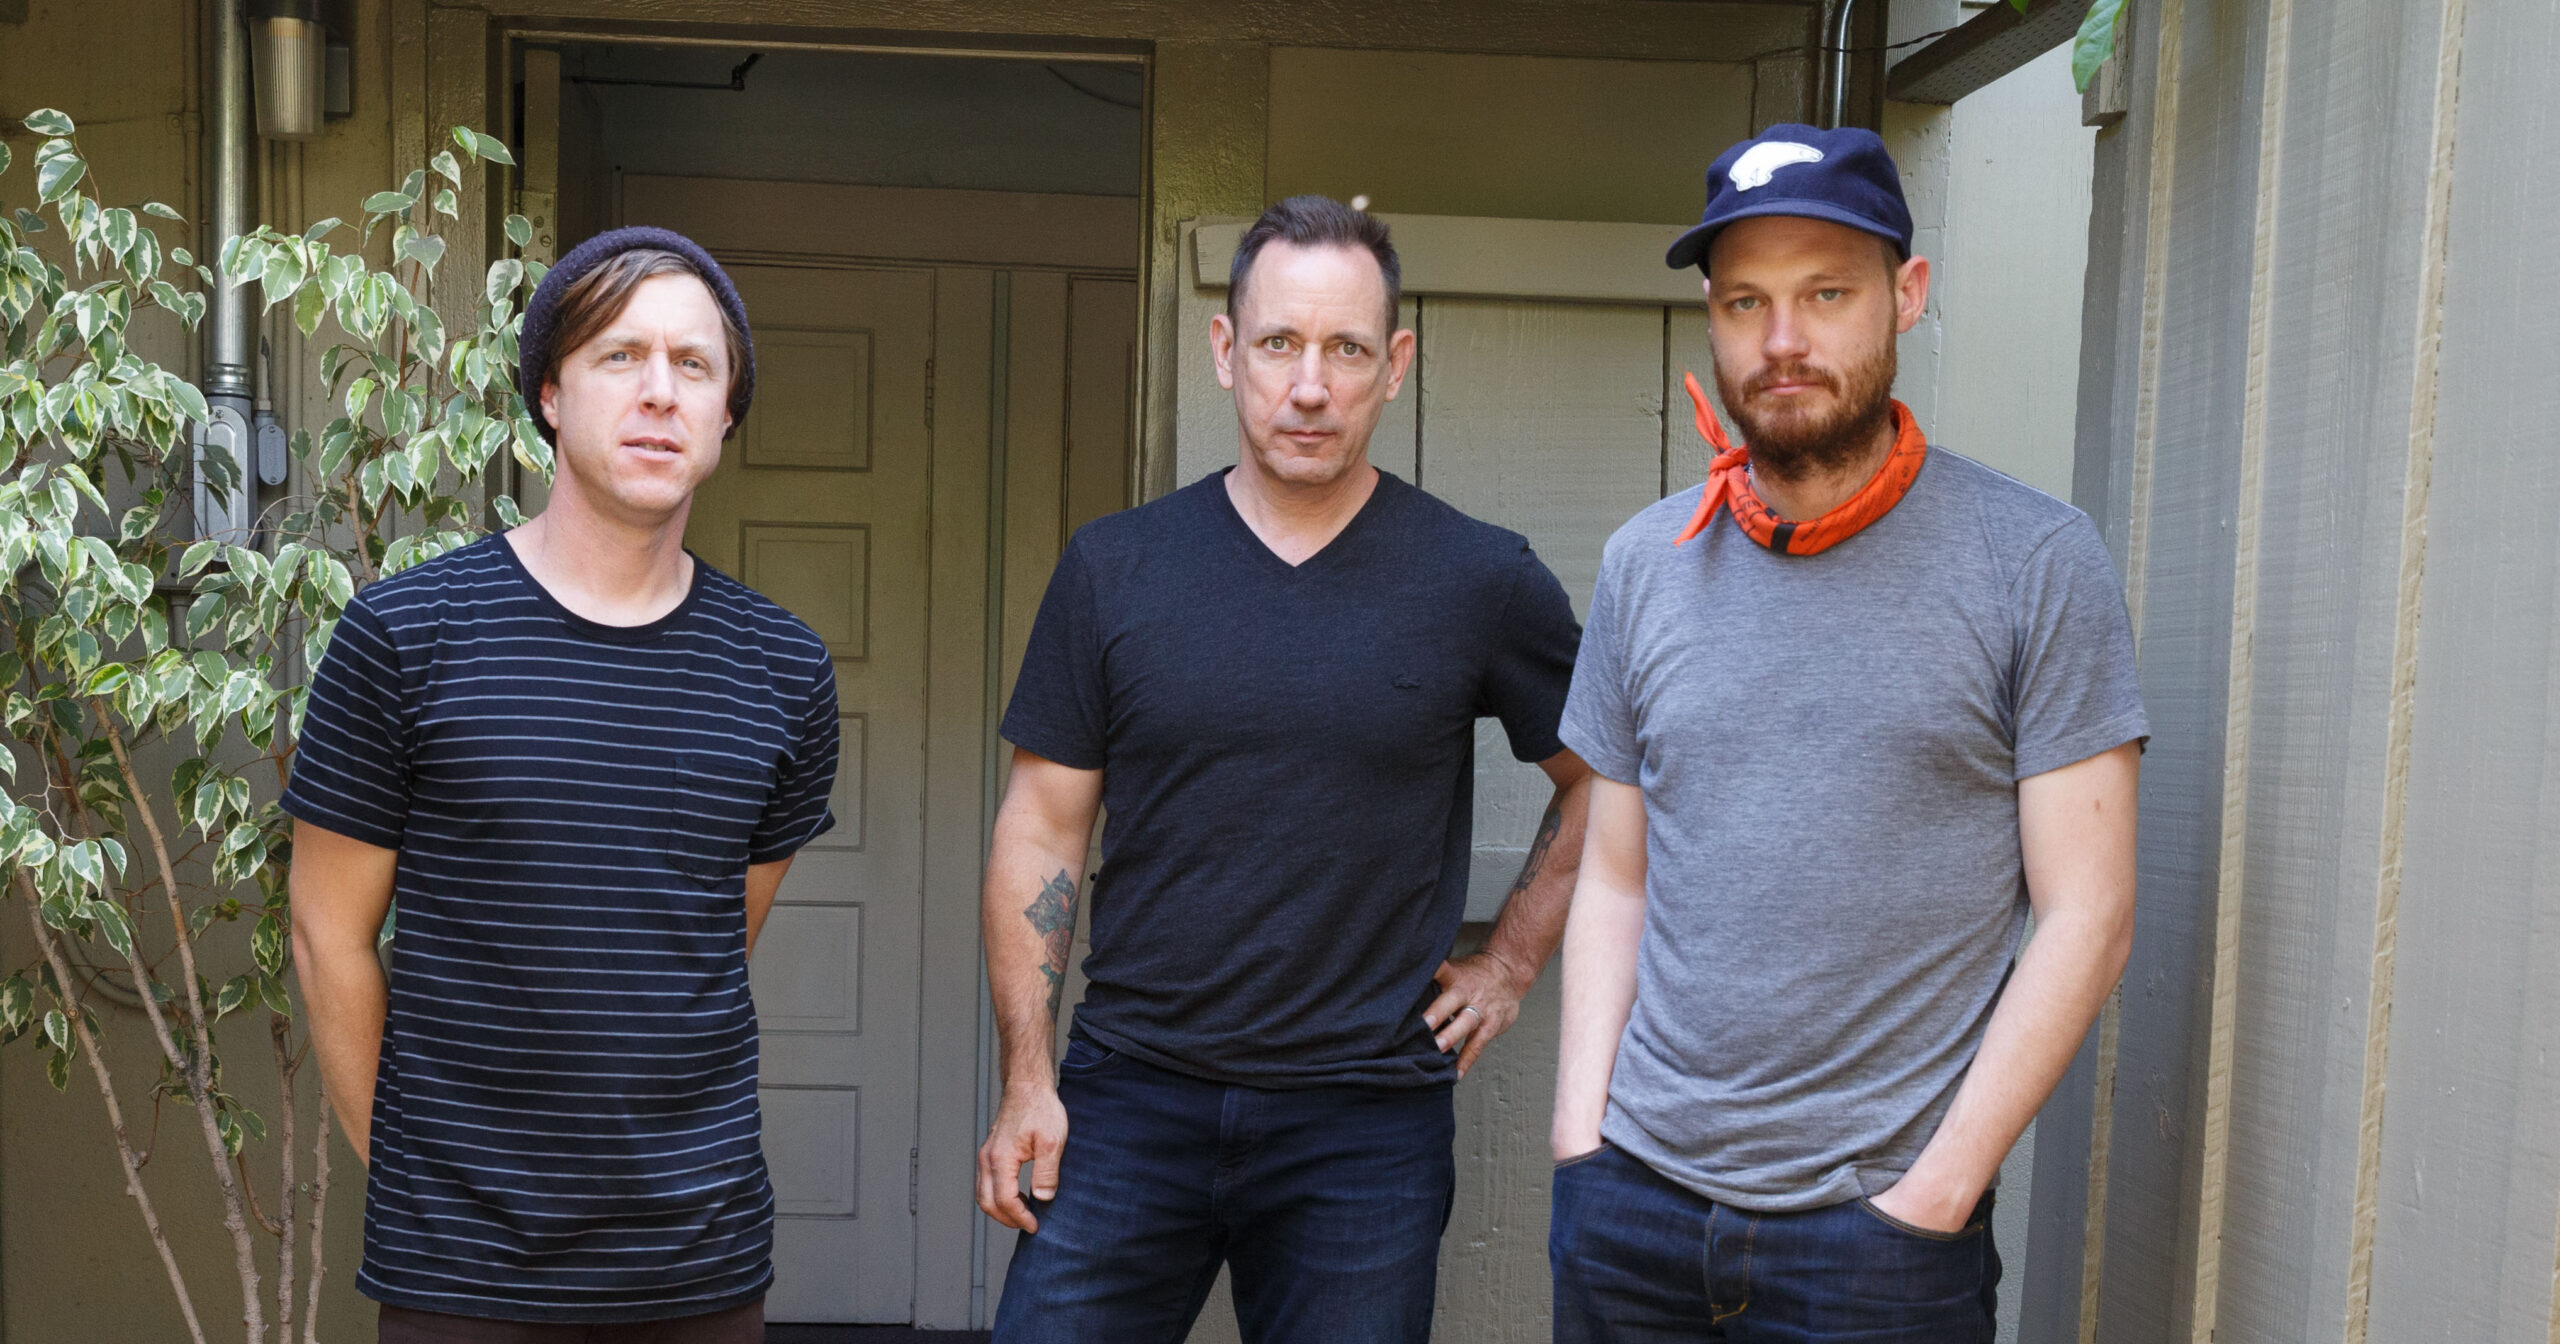 TRACK PREMIERE: Jimmy Chamberlin Complex announce new album & share new single 'Grace' - Listen Now! 